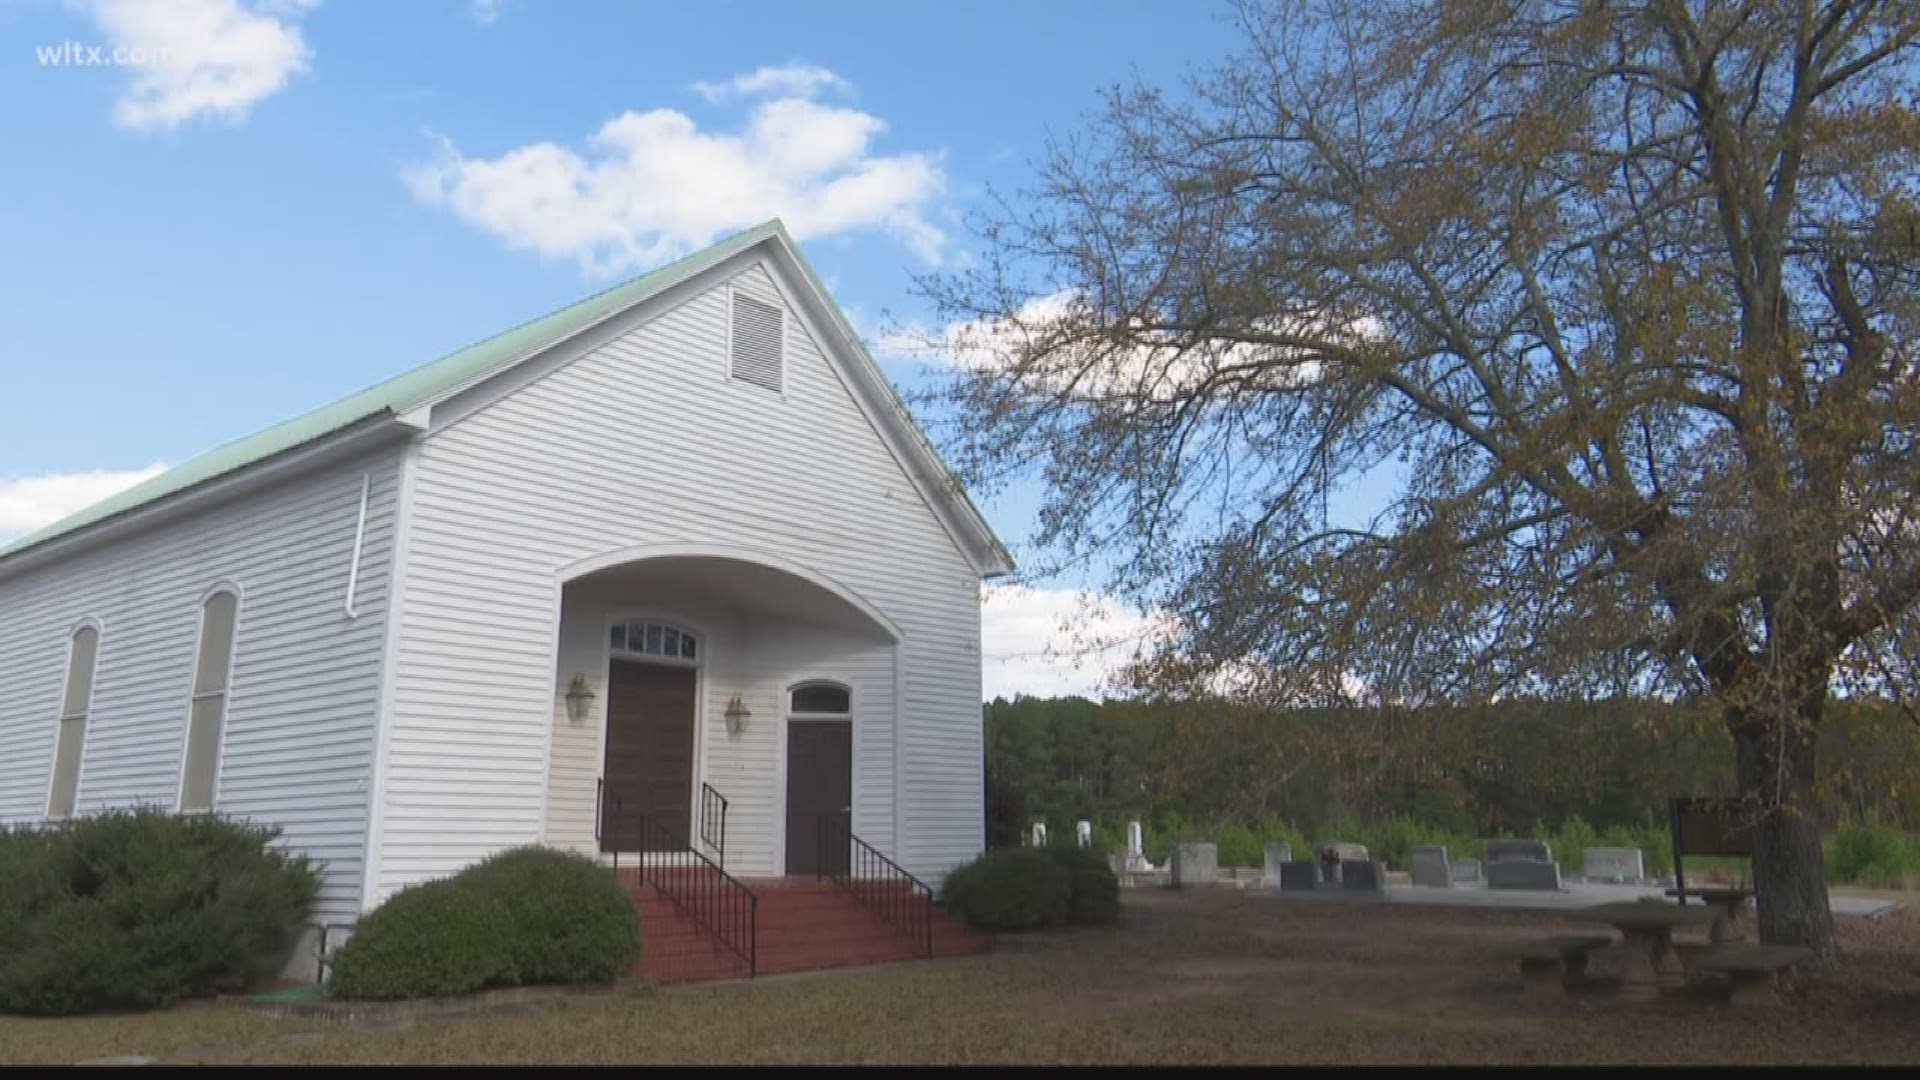 A Newberry County church could face penalties under federal law if they continue with their plan to house illegal immigrants starting next year.